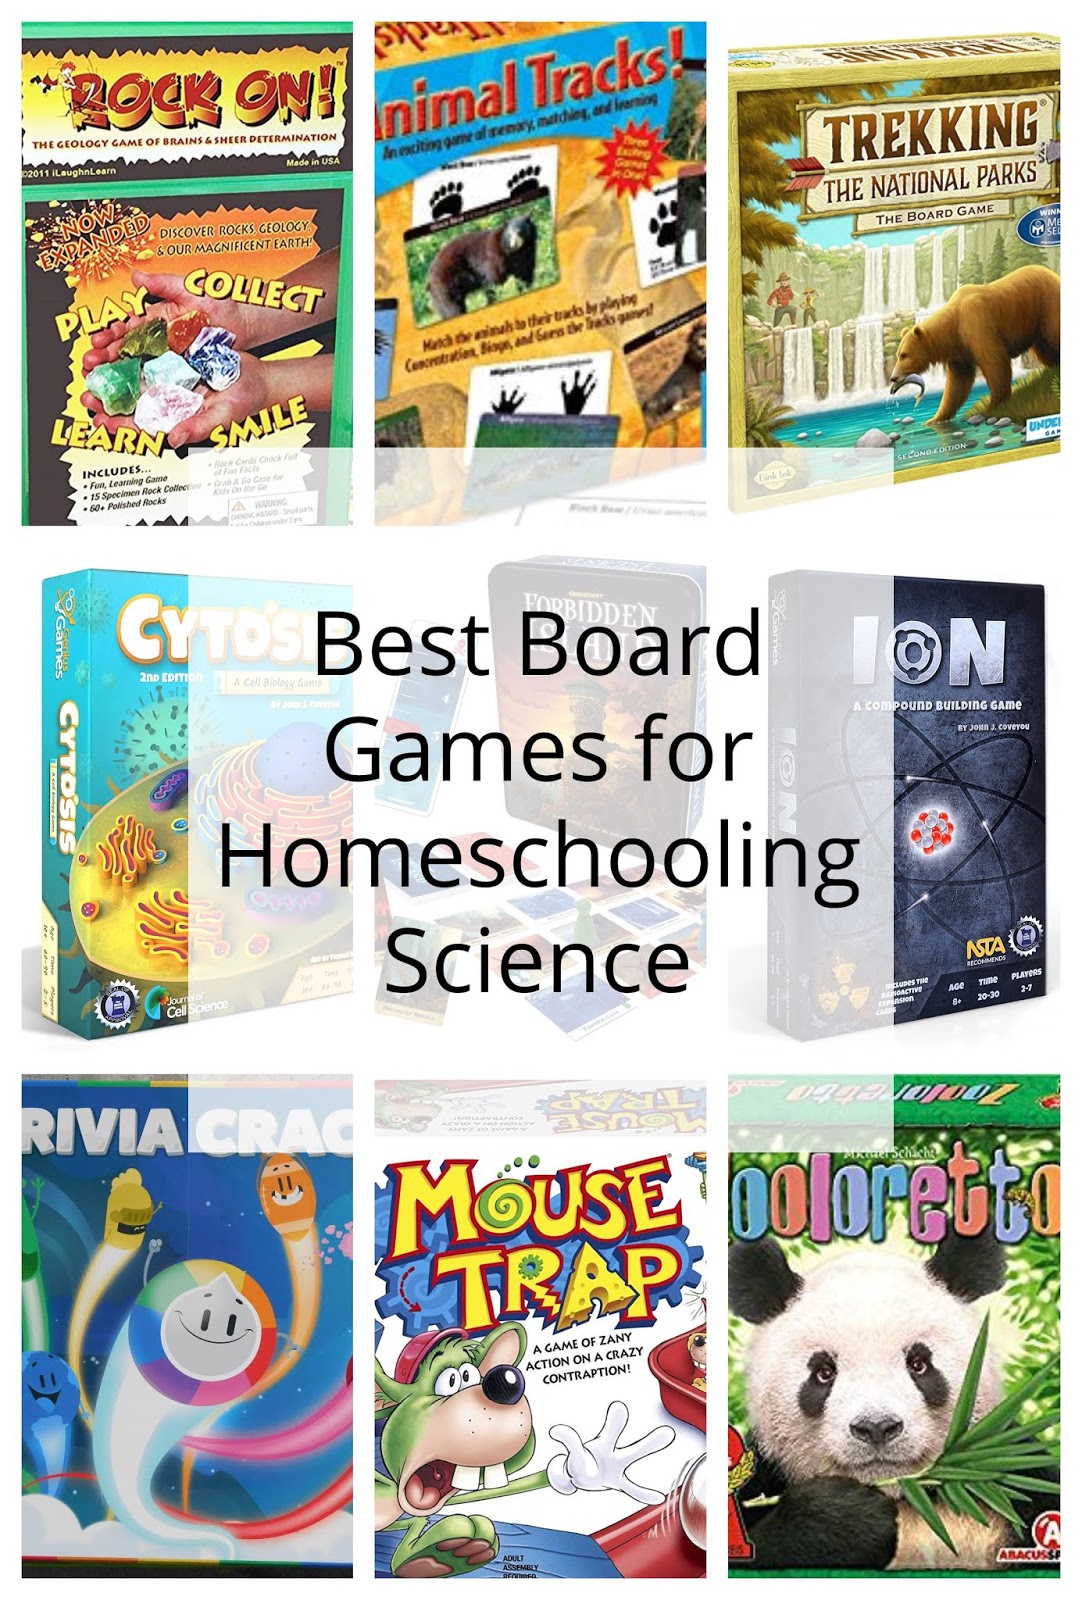 100 Days of Science #70-- Best Board Games for Science